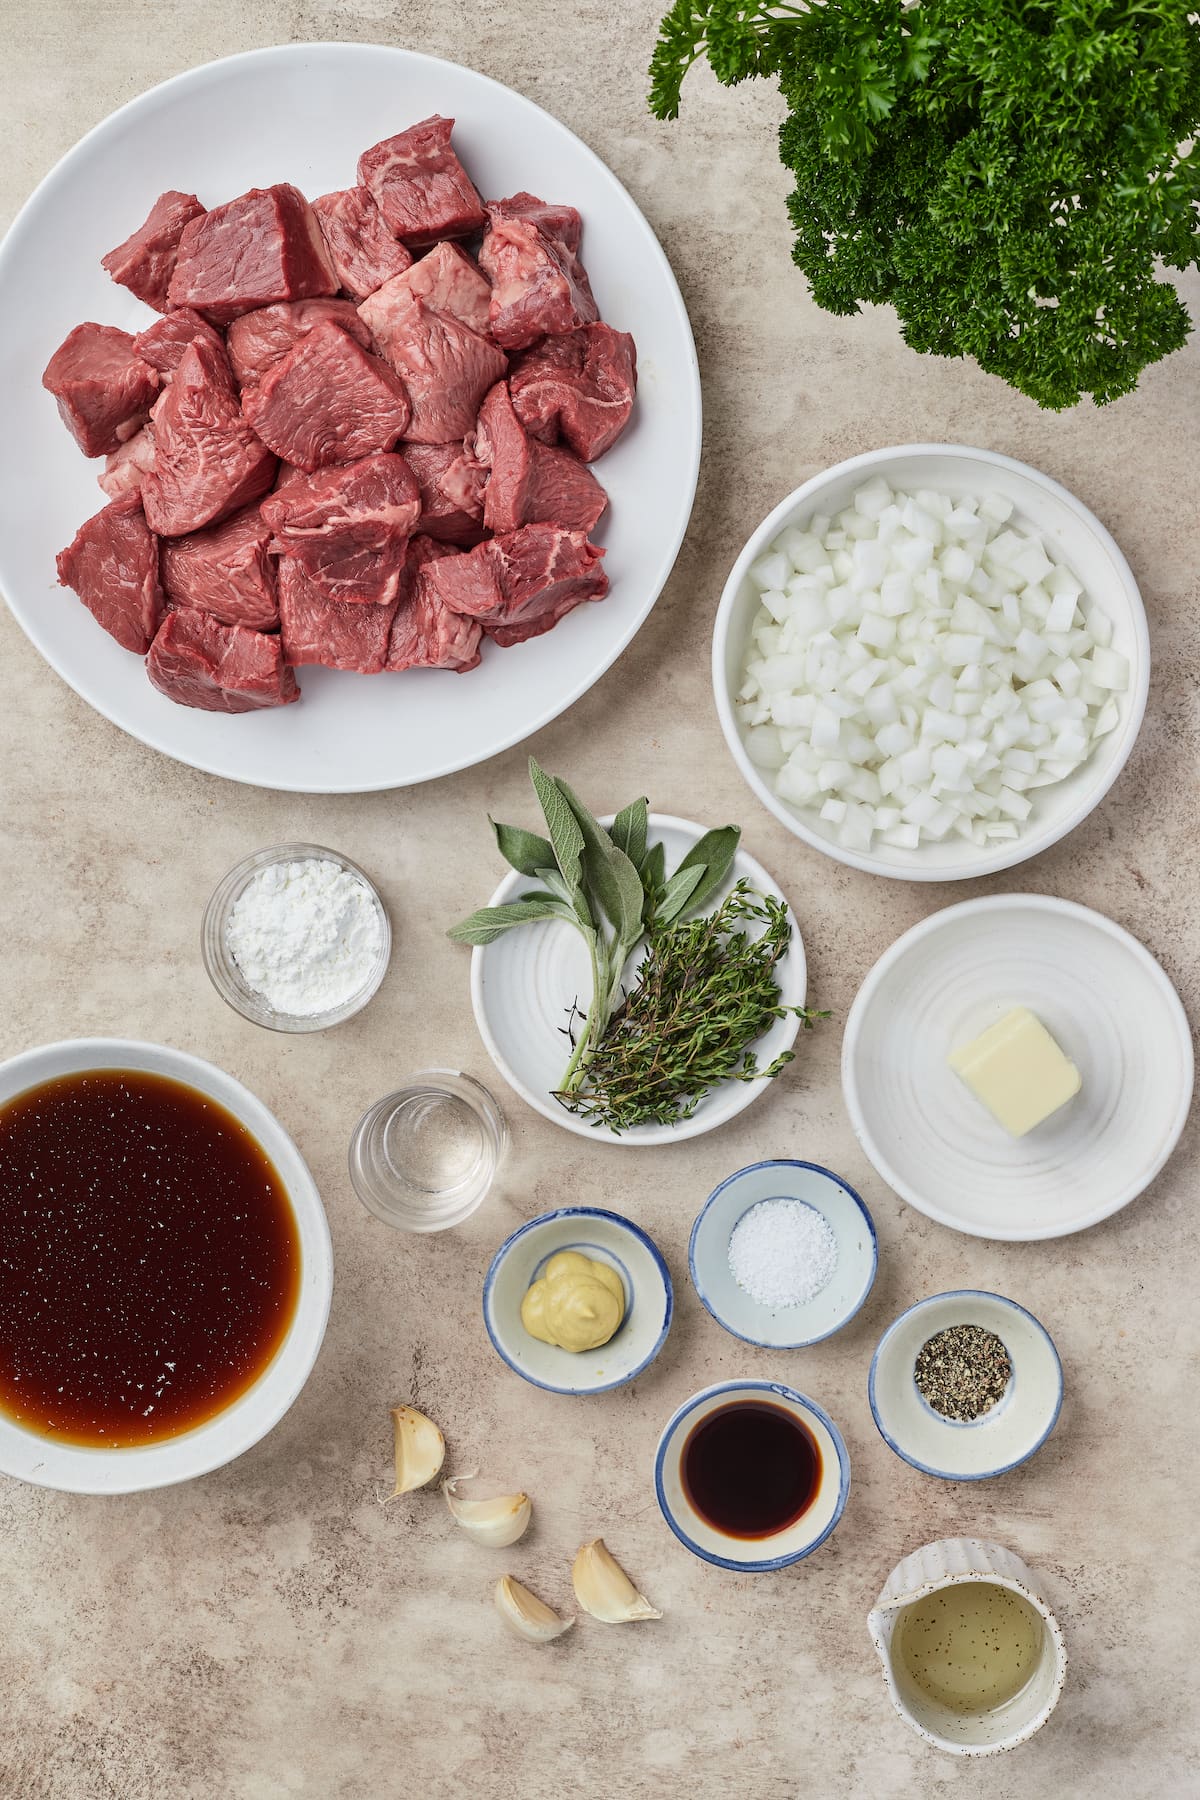 Ingredients for Instant Pot cubed beef.